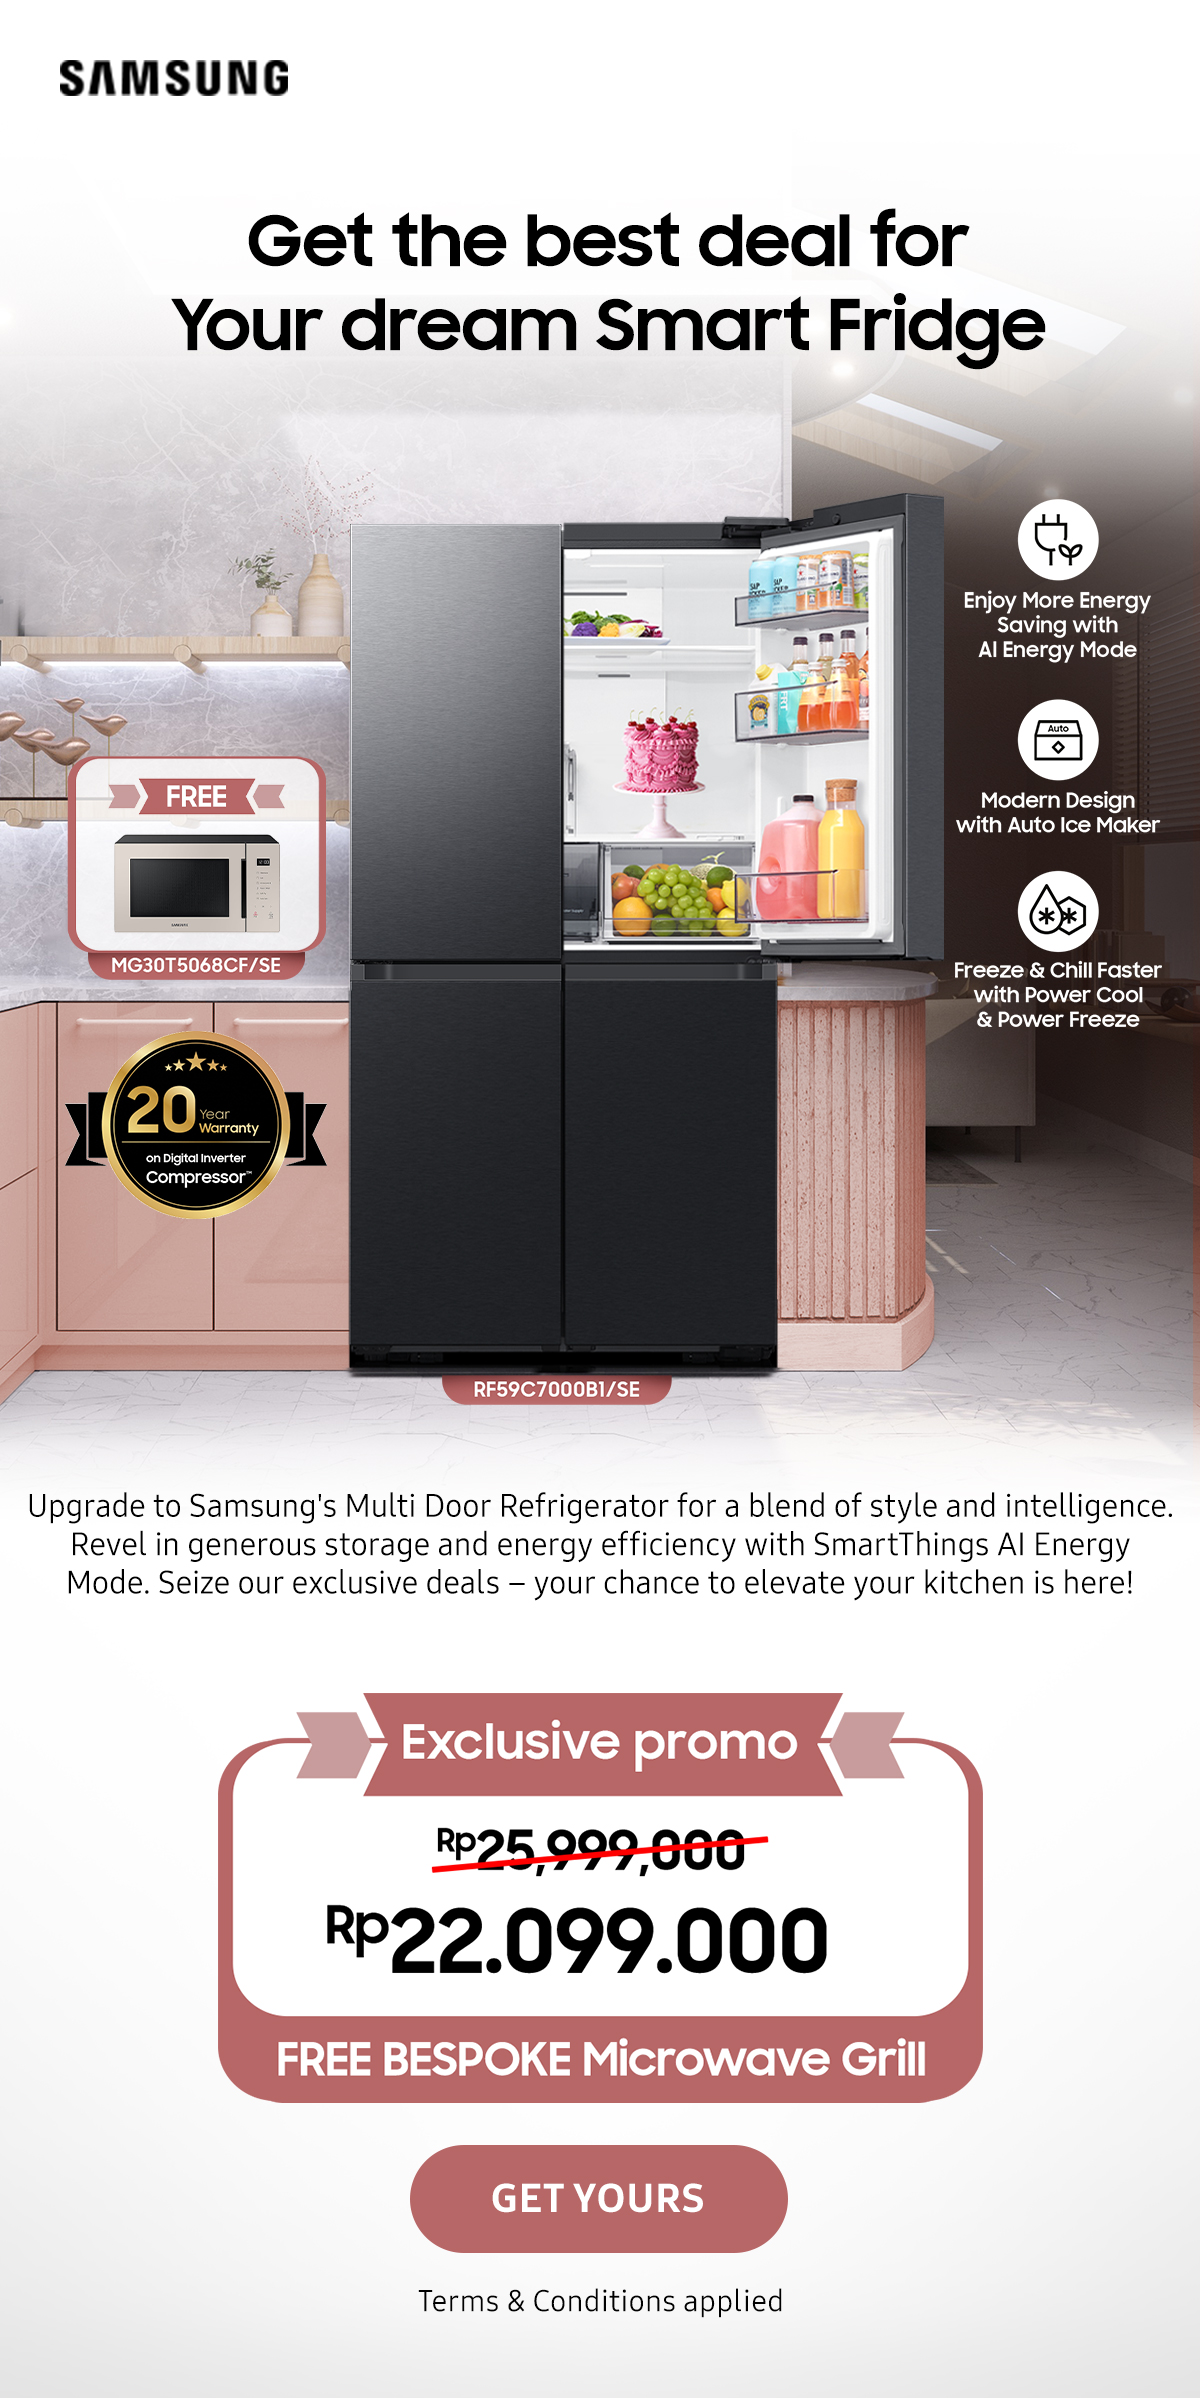 Get the best deal your dream Smart Fridge | Upgrade to Samsung's Multi Door Refrigerator for a blend of style and intelligence. Revel in generous storage and energy efficiency with SmartThings Al Energy Mode. Seize our exclusive deals - your chance to elevate your kitchen is here!